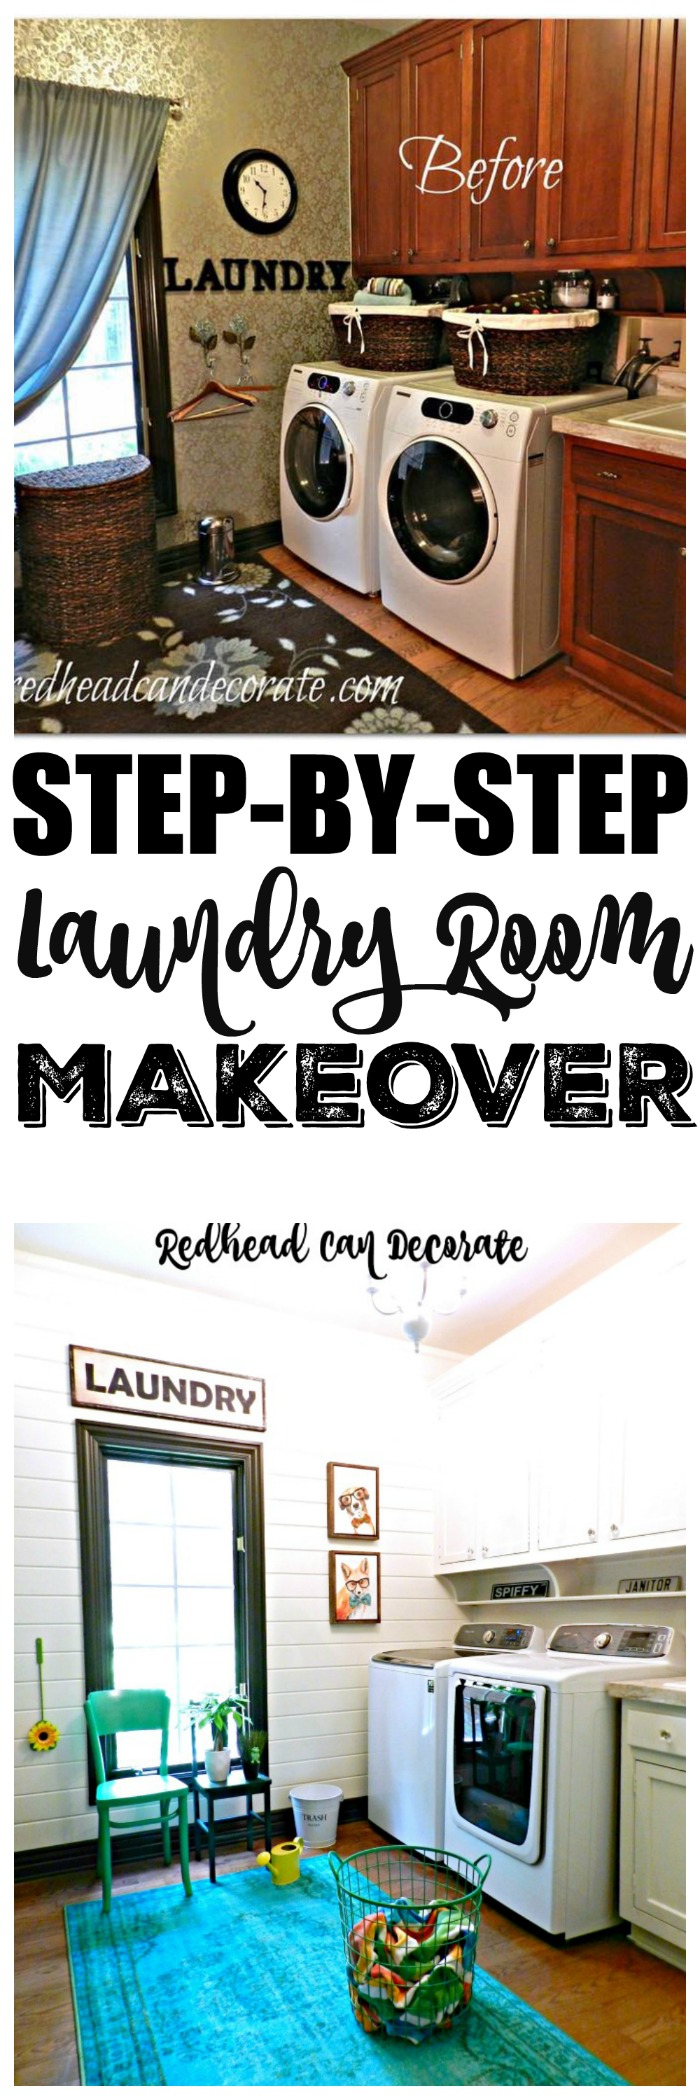 This DIY Laundry Room Makeover is filled with cute ideas for an affordable transformation from dated to light bright and beautiful!